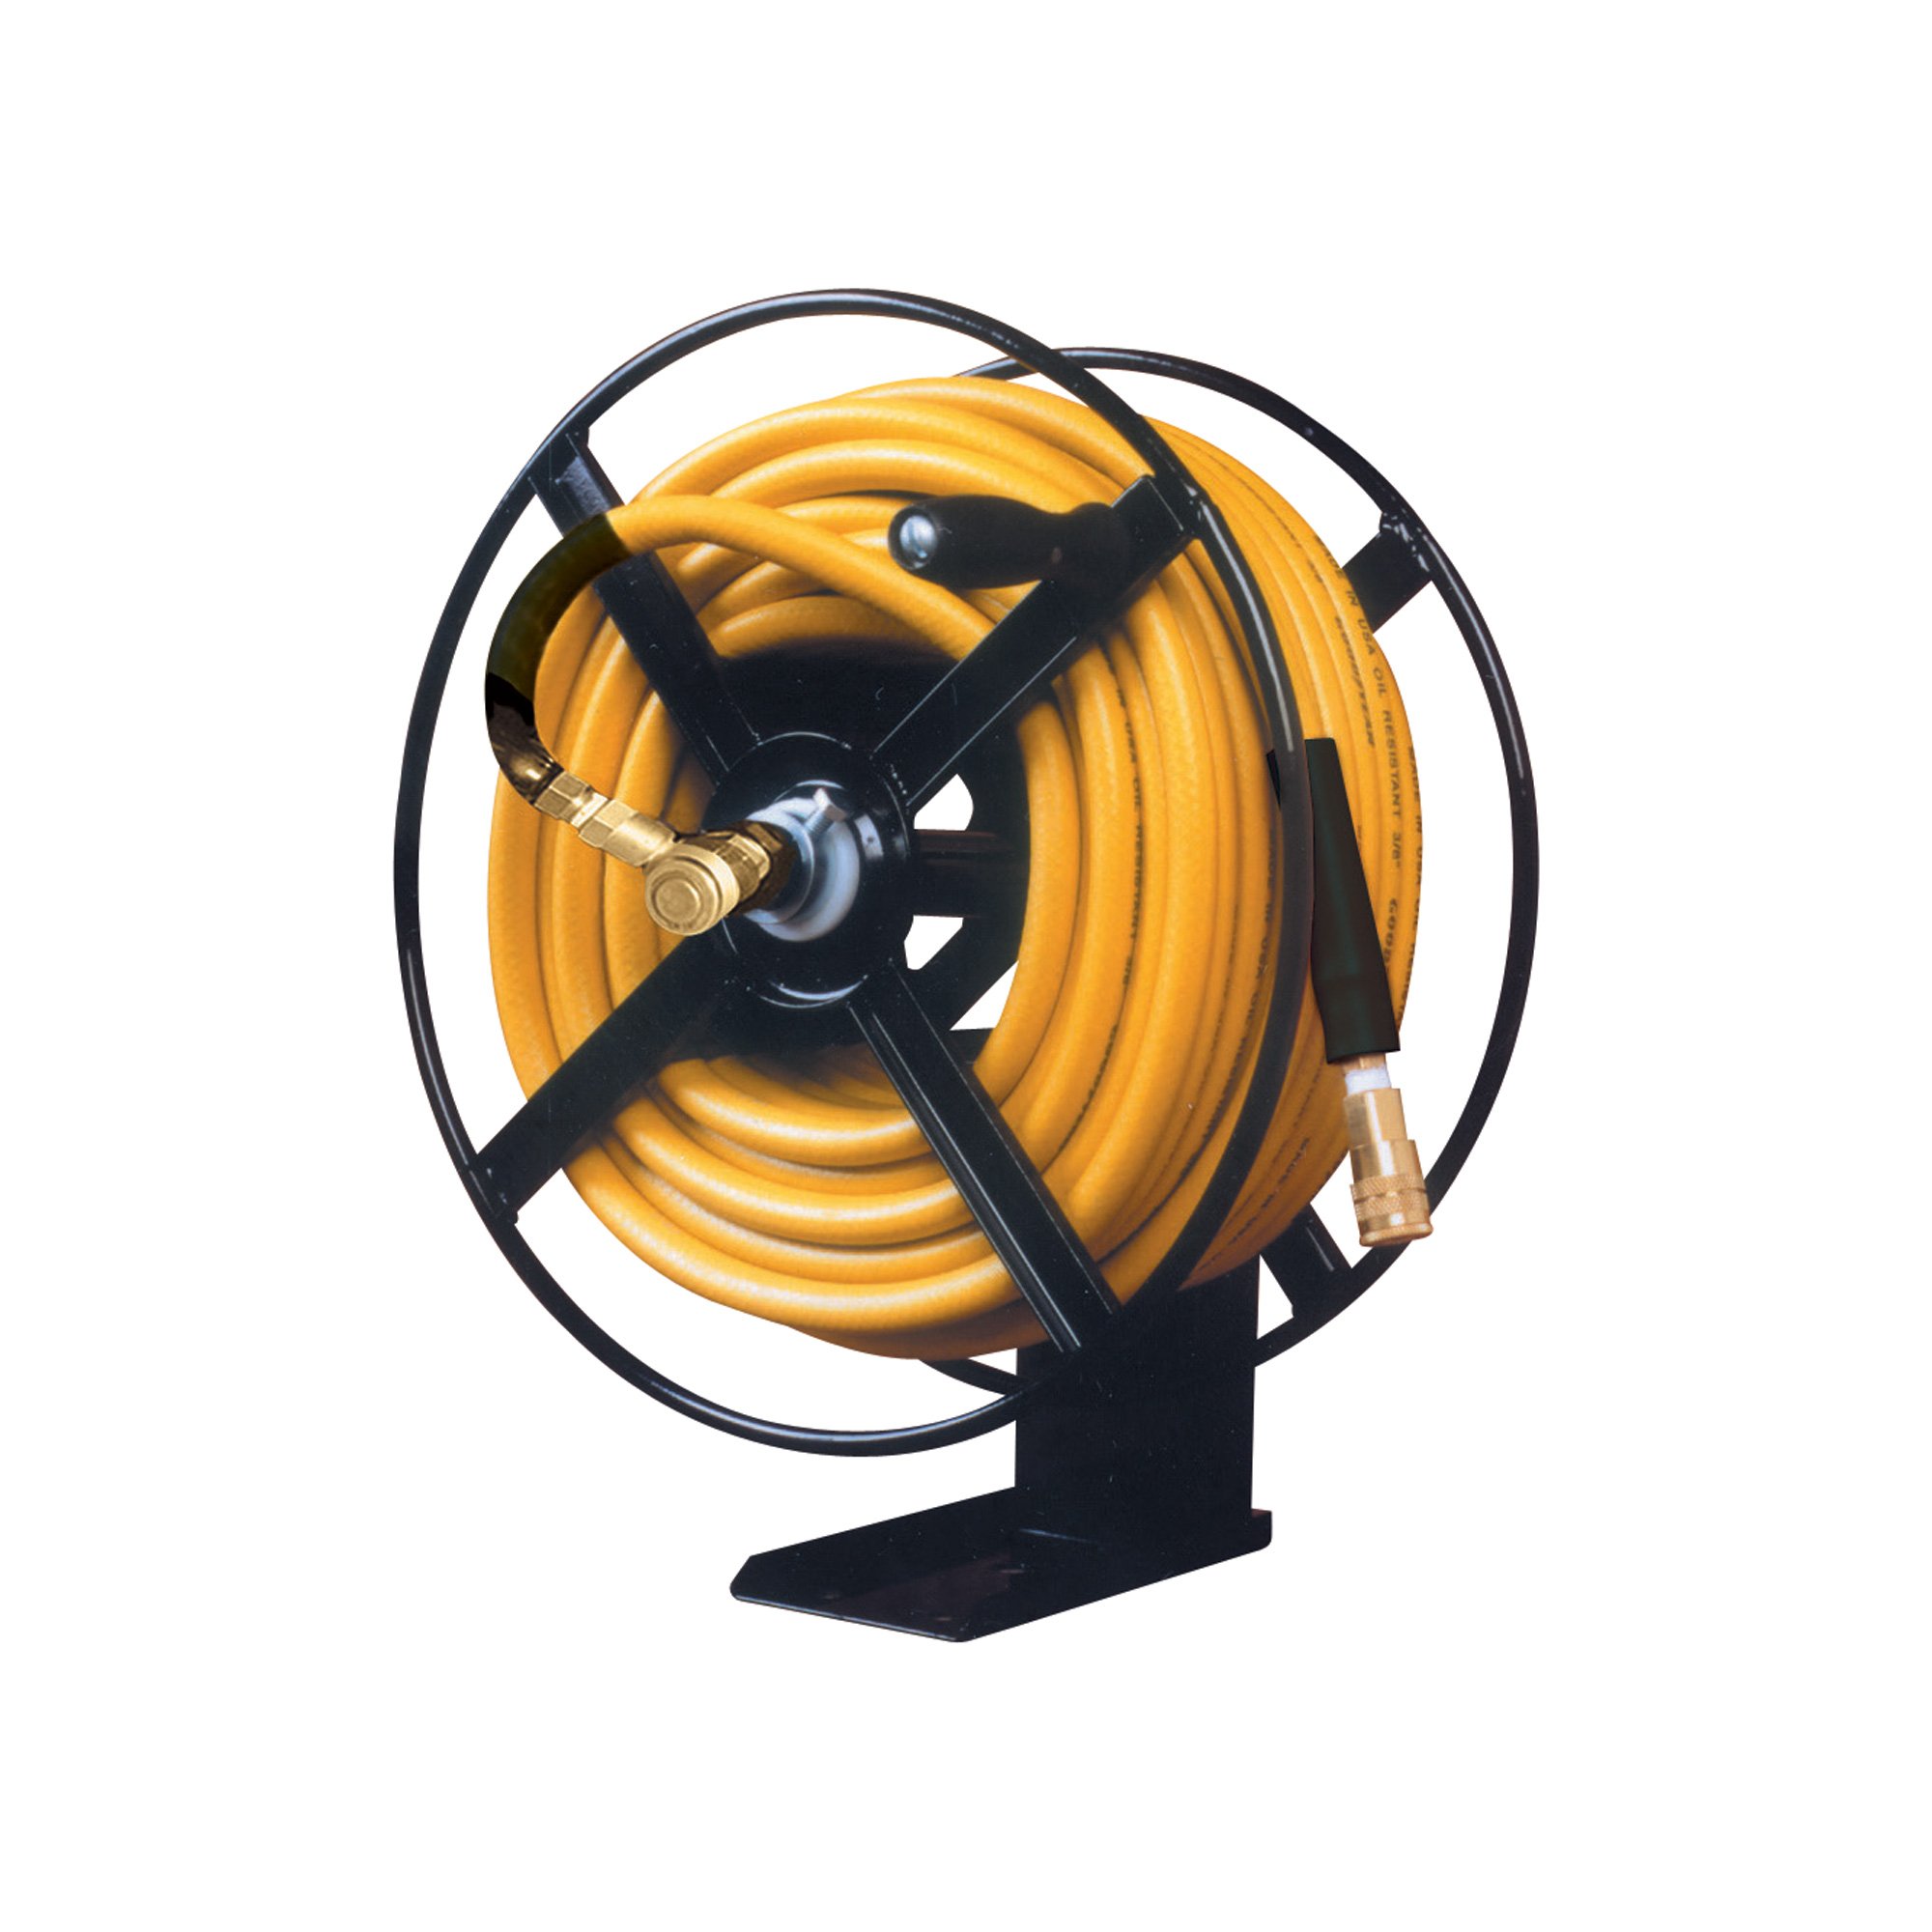 SP Systems Pressure Washer Hose Reel — Holds 3/8in. x 150ft. Hose